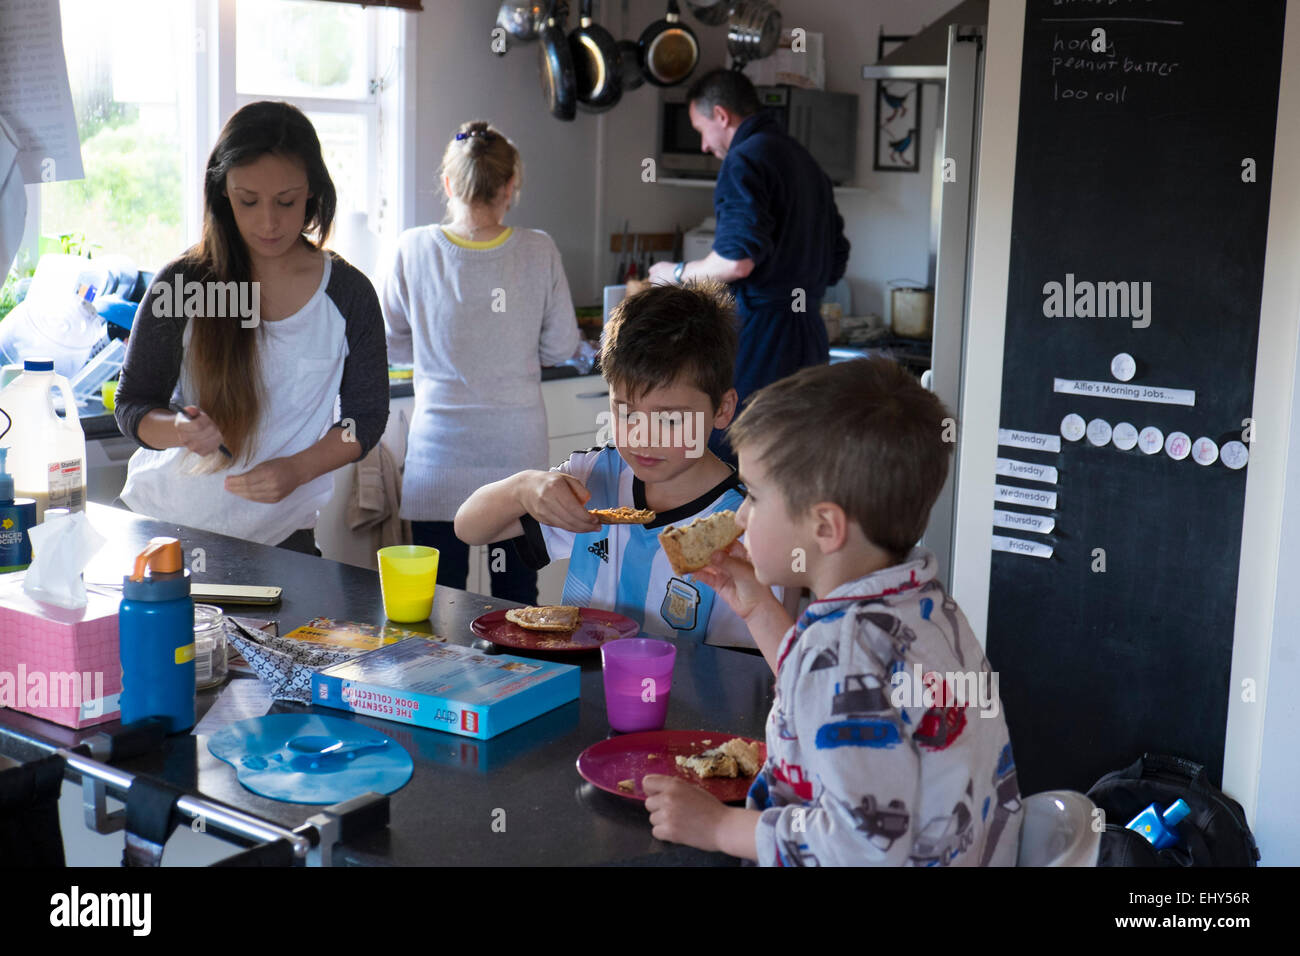 Family in kitchen preparing and eating food Stock Photo